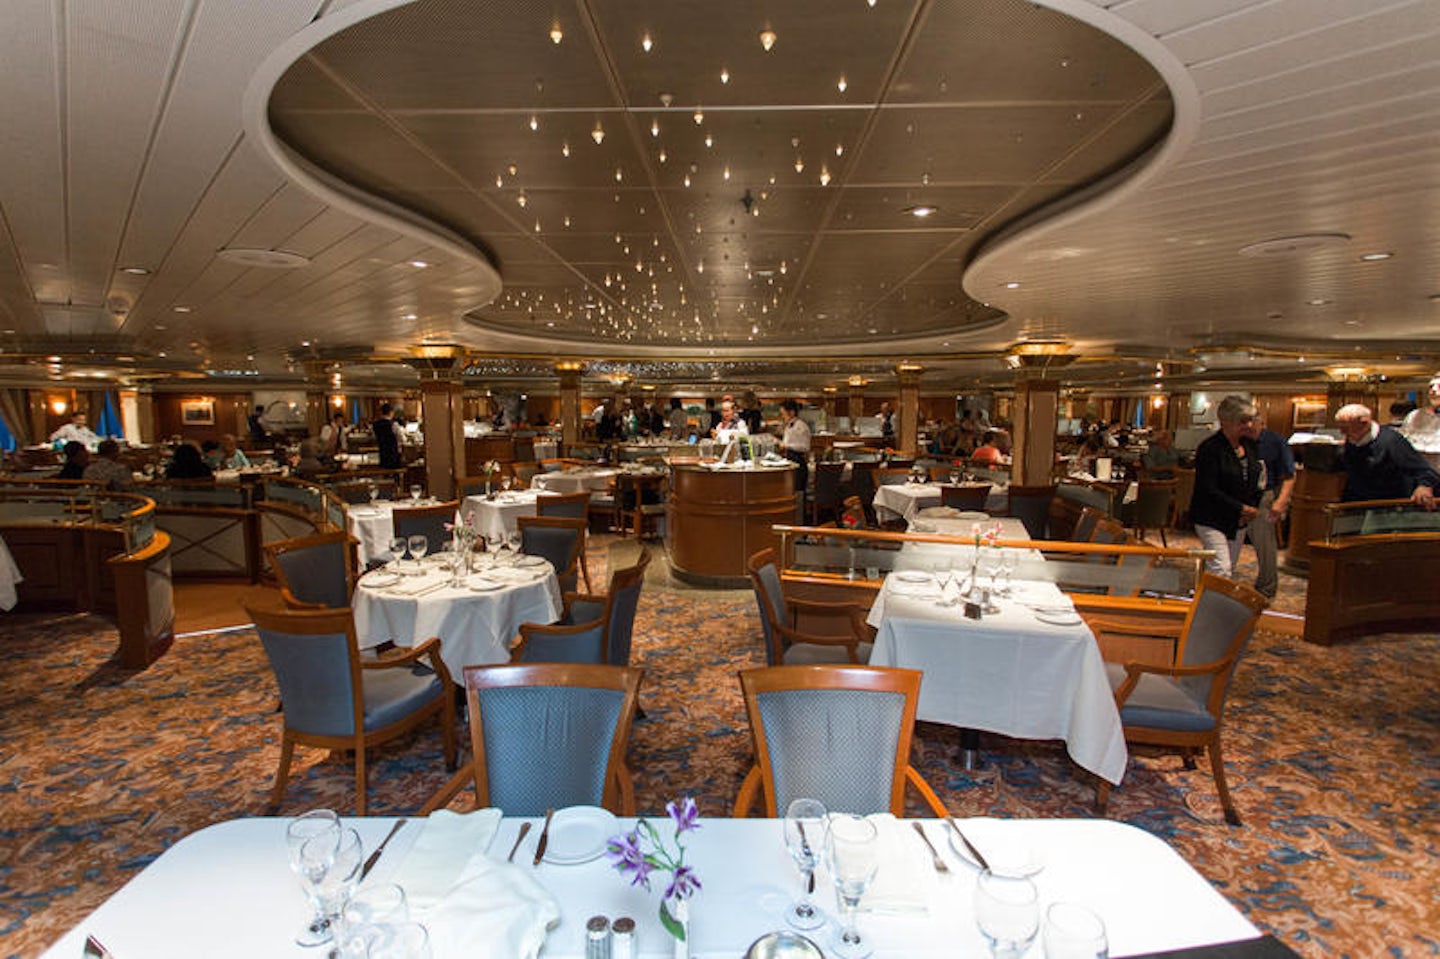 Provence Dining Room on Coral Princess